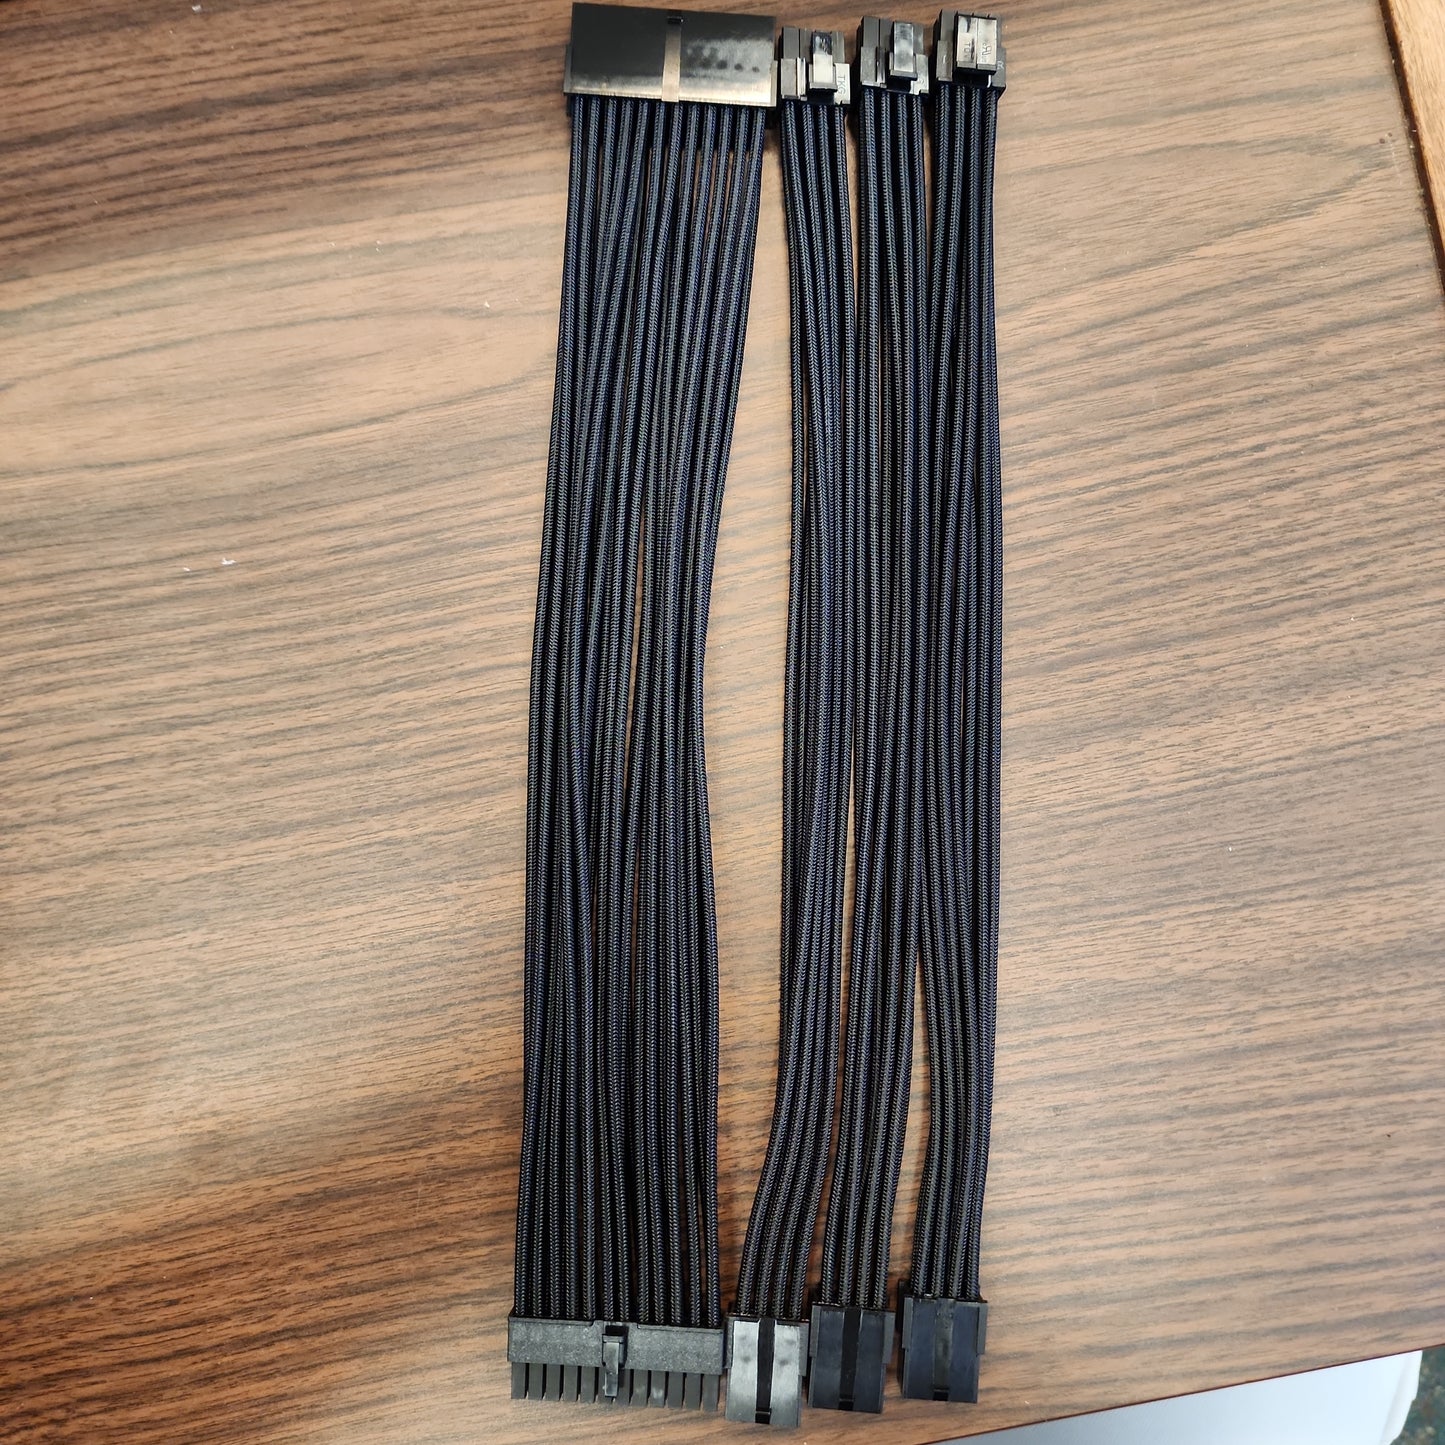 PSU Cable Extension Kit